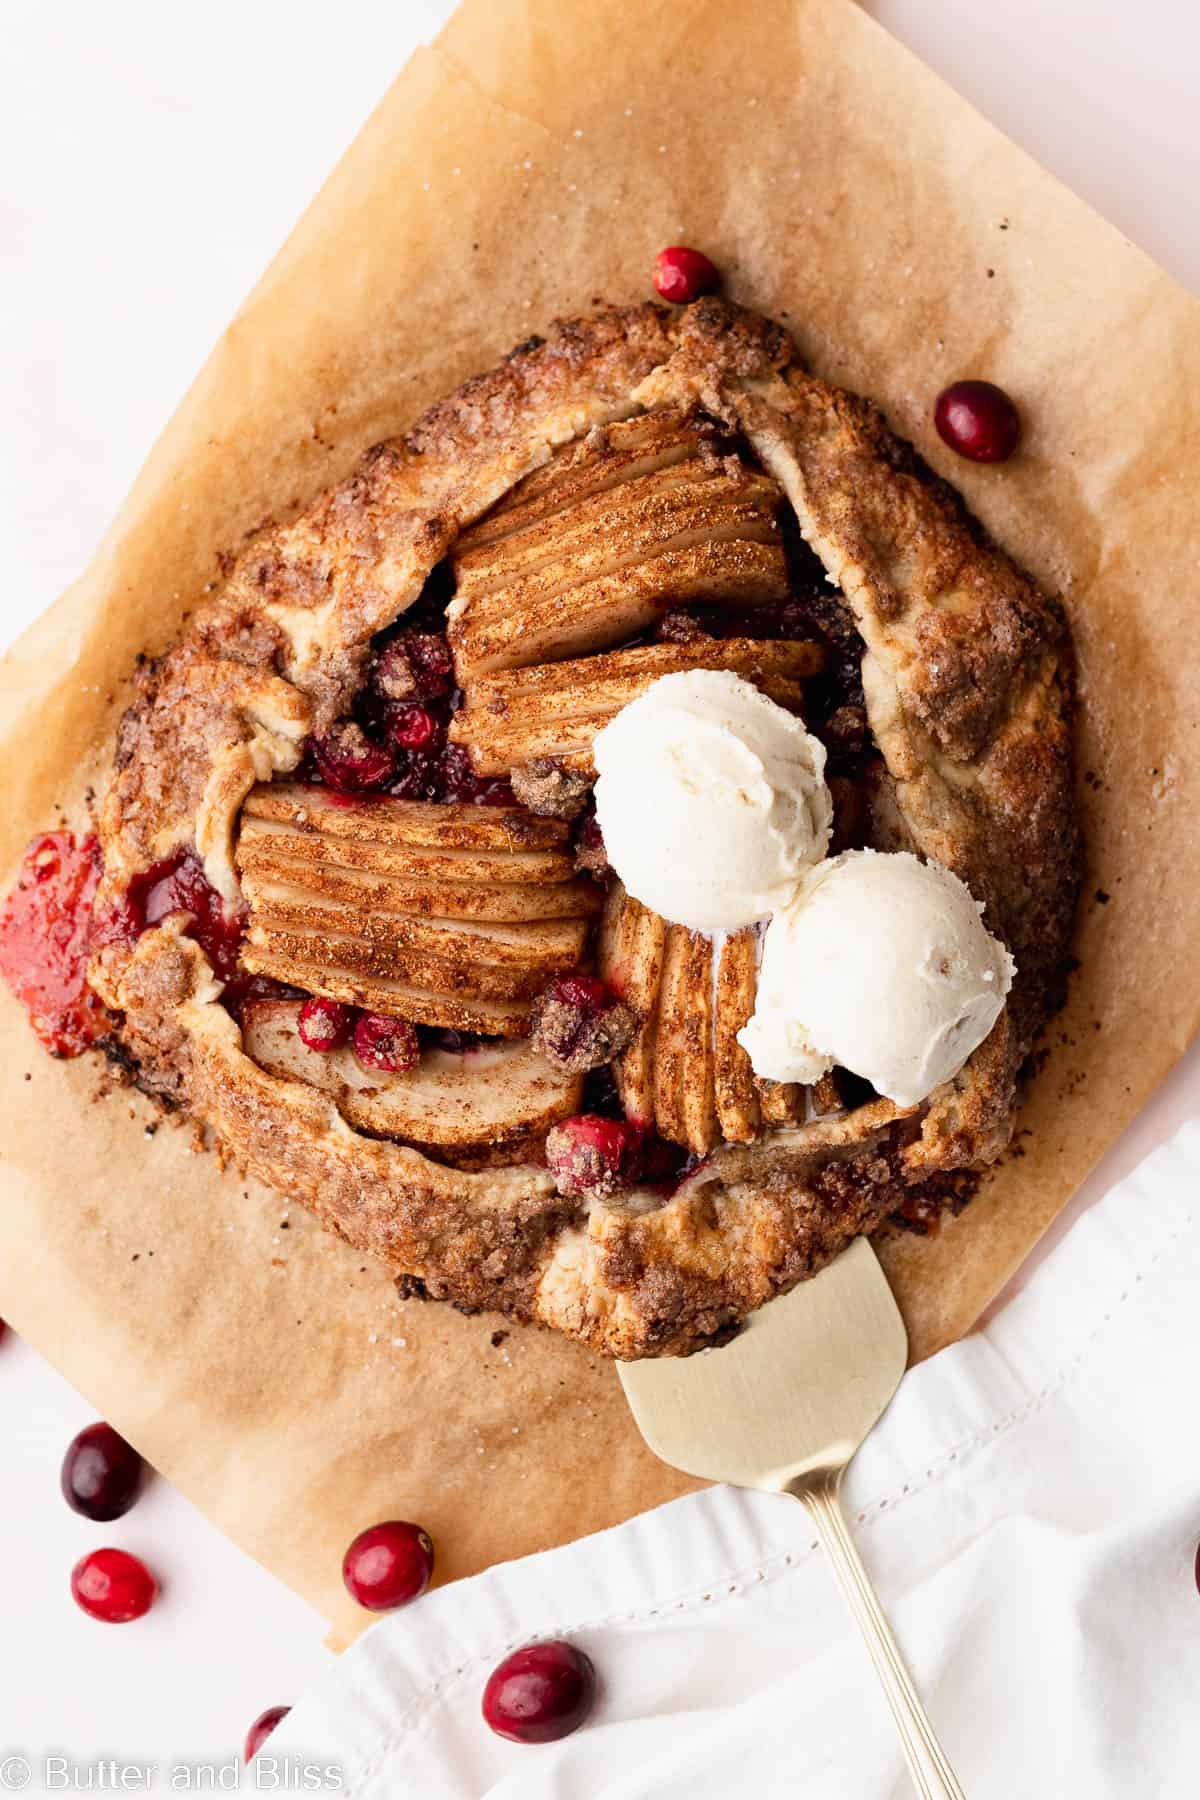 Top view of a pretty cranberry pear galette with scoops of ice cream.